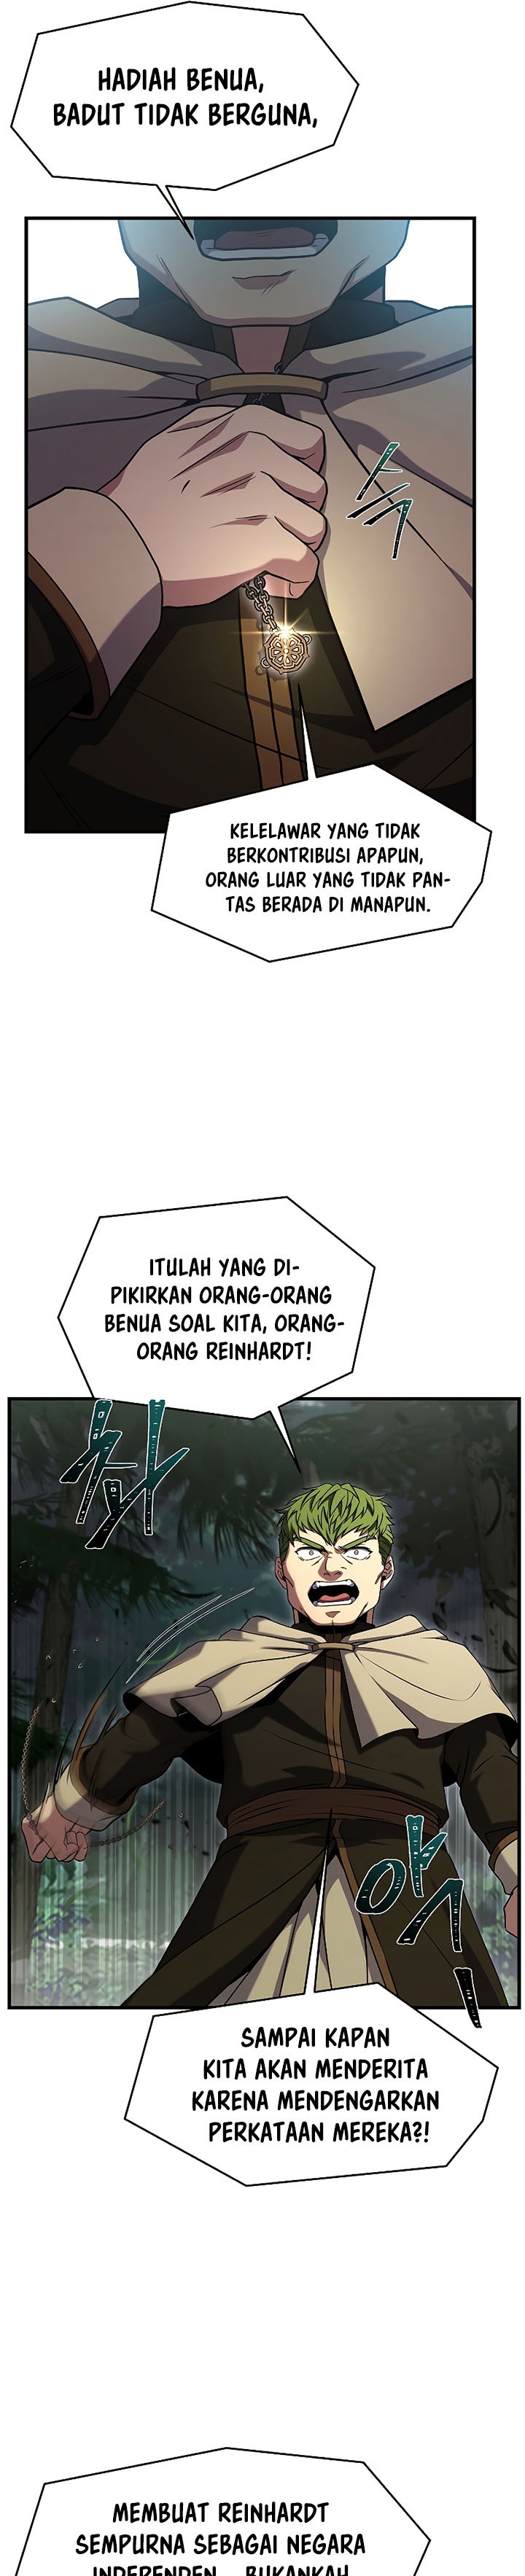 Return Of The Greatest Lancer Chapter 81